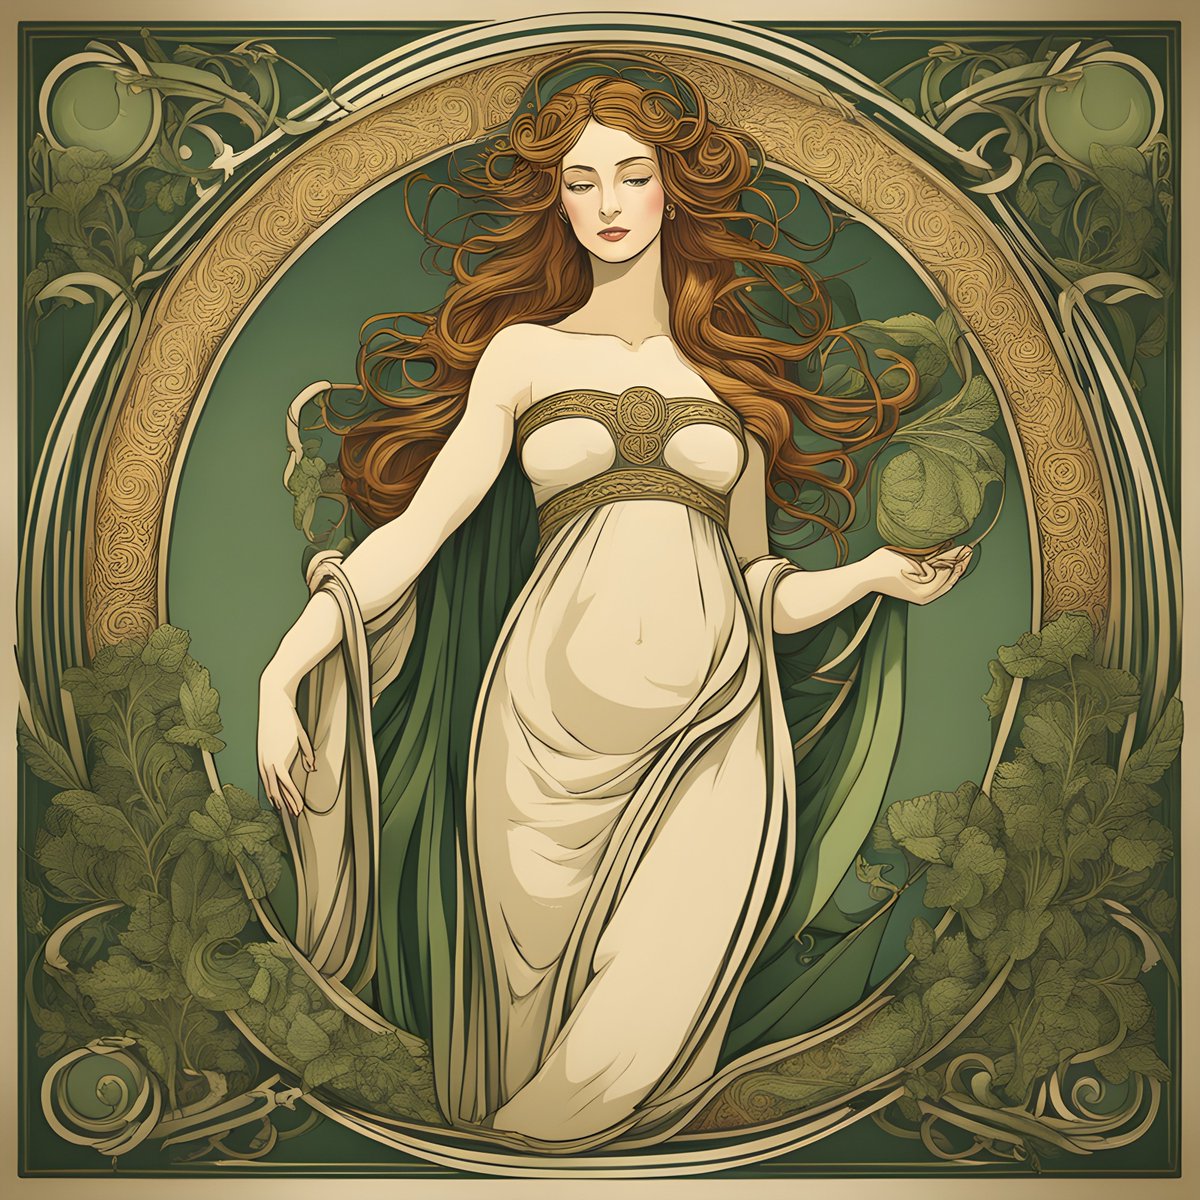 #MothersDay  #Macha #Irishfolklore
In Irish mythology, Macha is a goddess of motherhood and sovereignty. In the tale 'Macha's Curse,' she curses Ulstermen for their absence during her difficult childbirth, highlighting the strength and power of mothers.